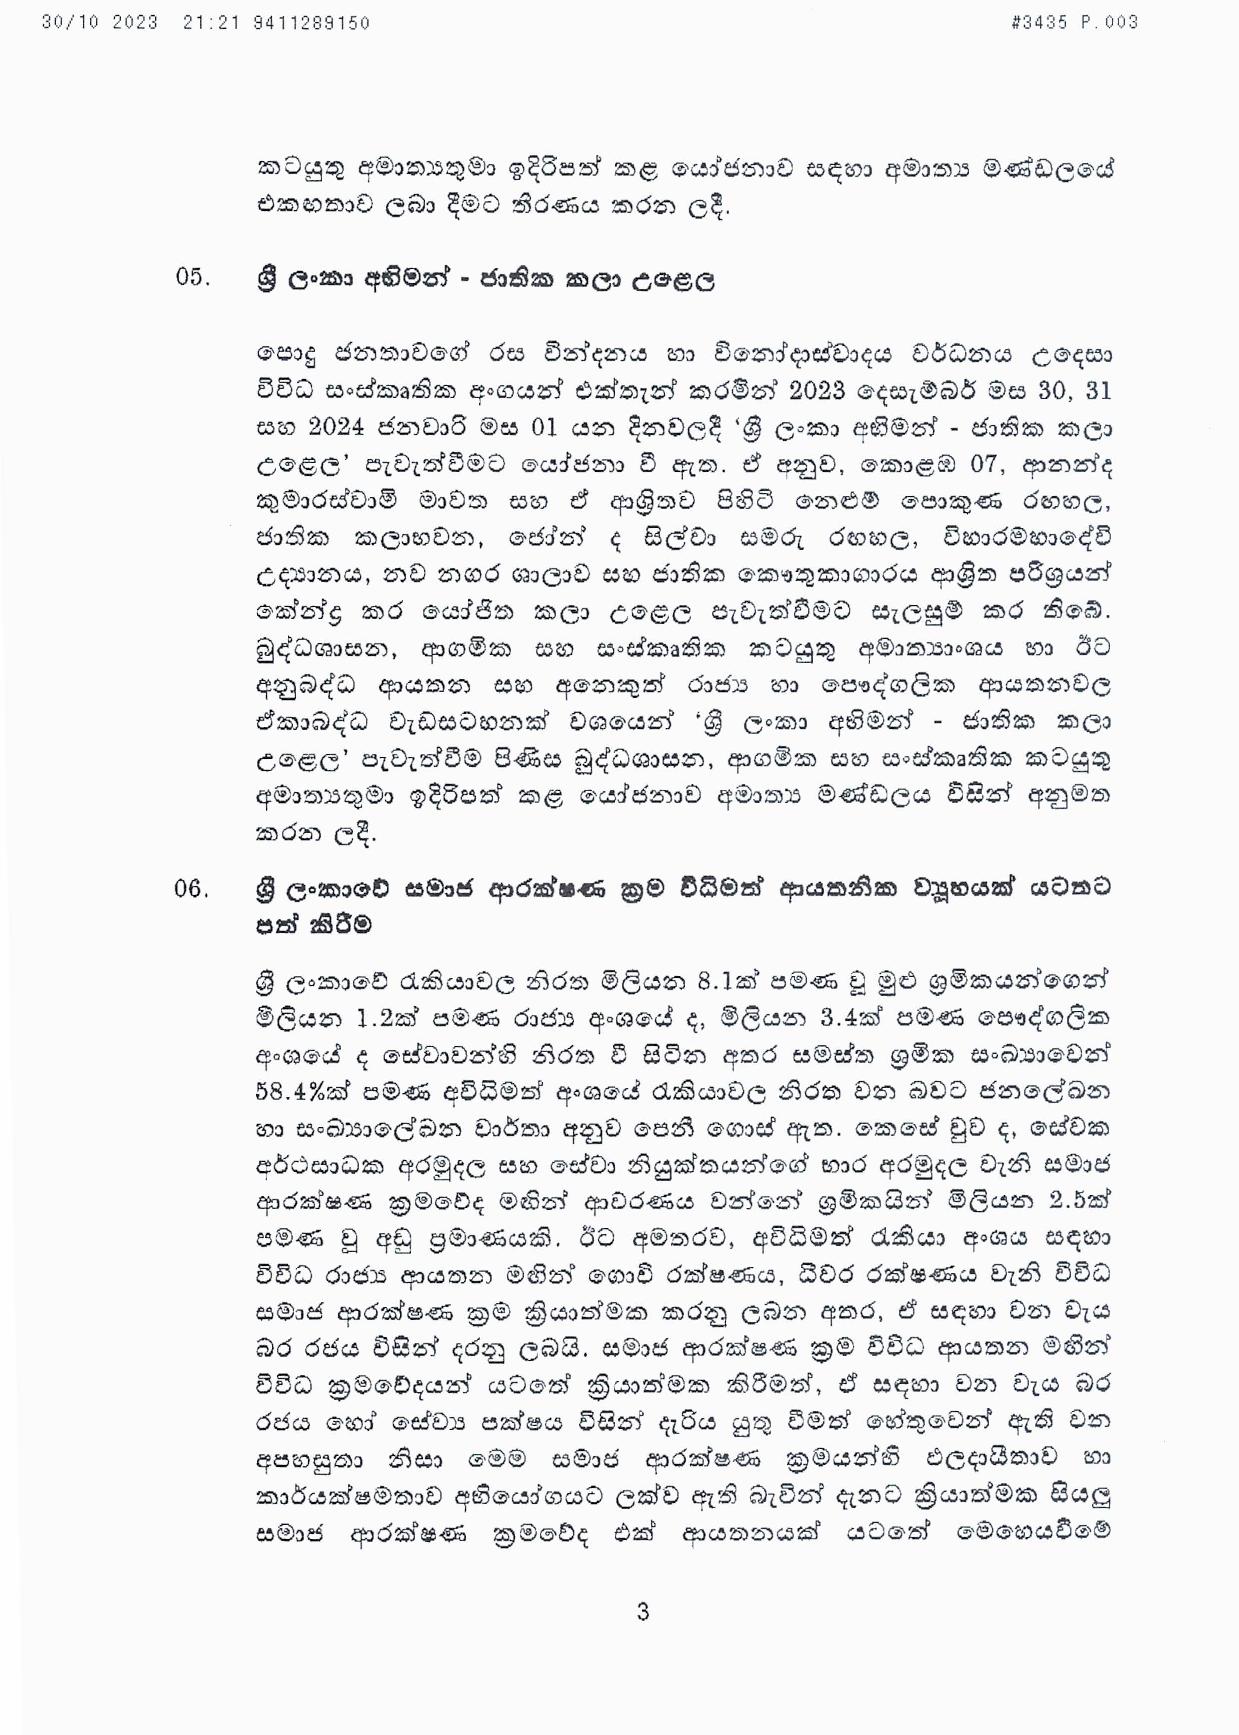 Cabinet Decisions on 30.10.2023 page 003